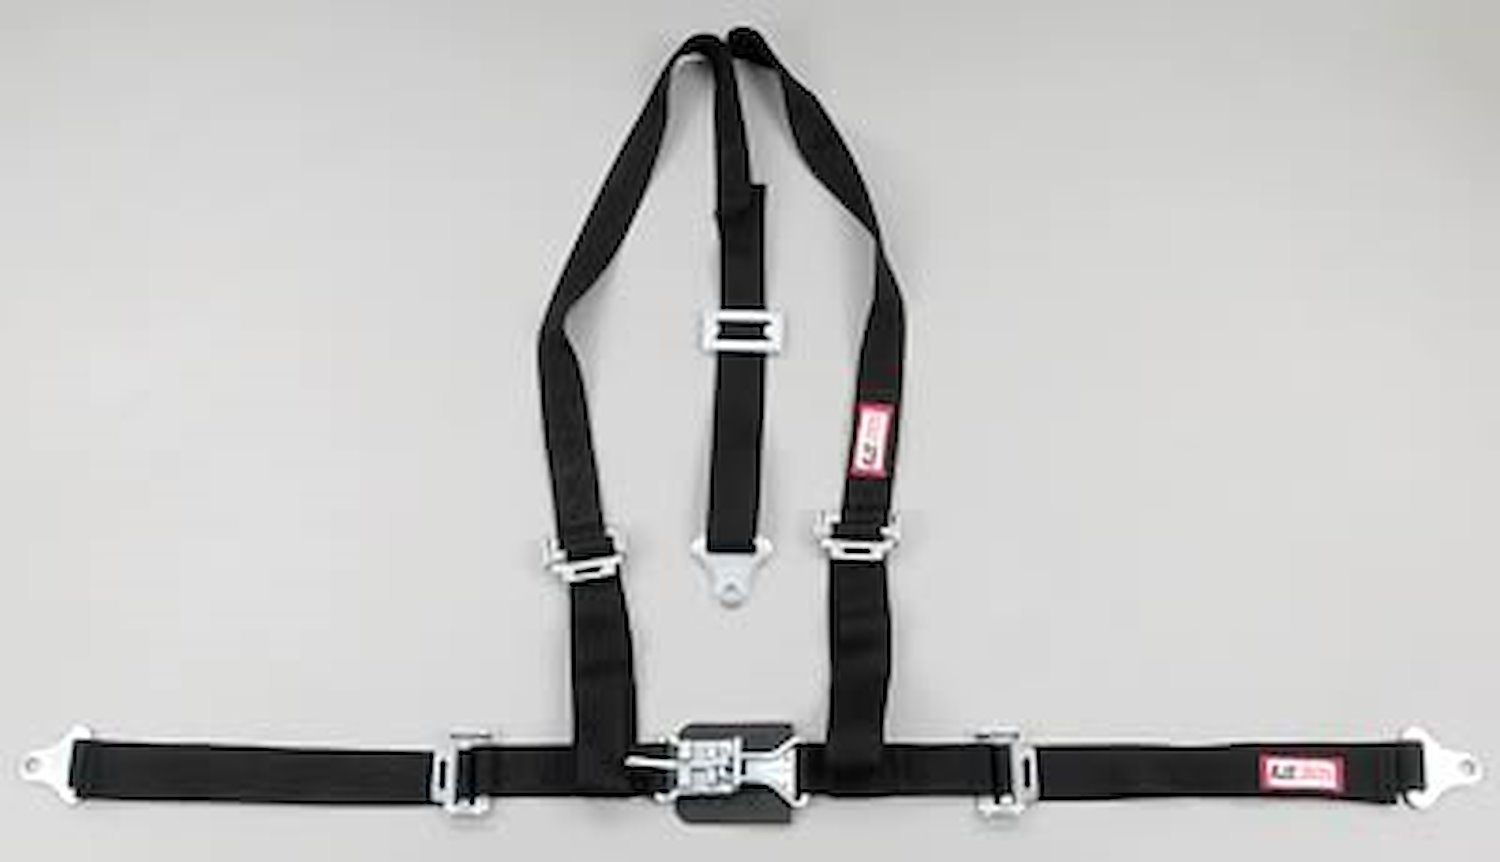 NON-SFI L&L HARNESS 3 PULL DOWN Lap BELT SNAP SEWN IN 2 S.H. Y FLOOR Mount w/STERNUM STRAP WRAP/BOLT YELLOW